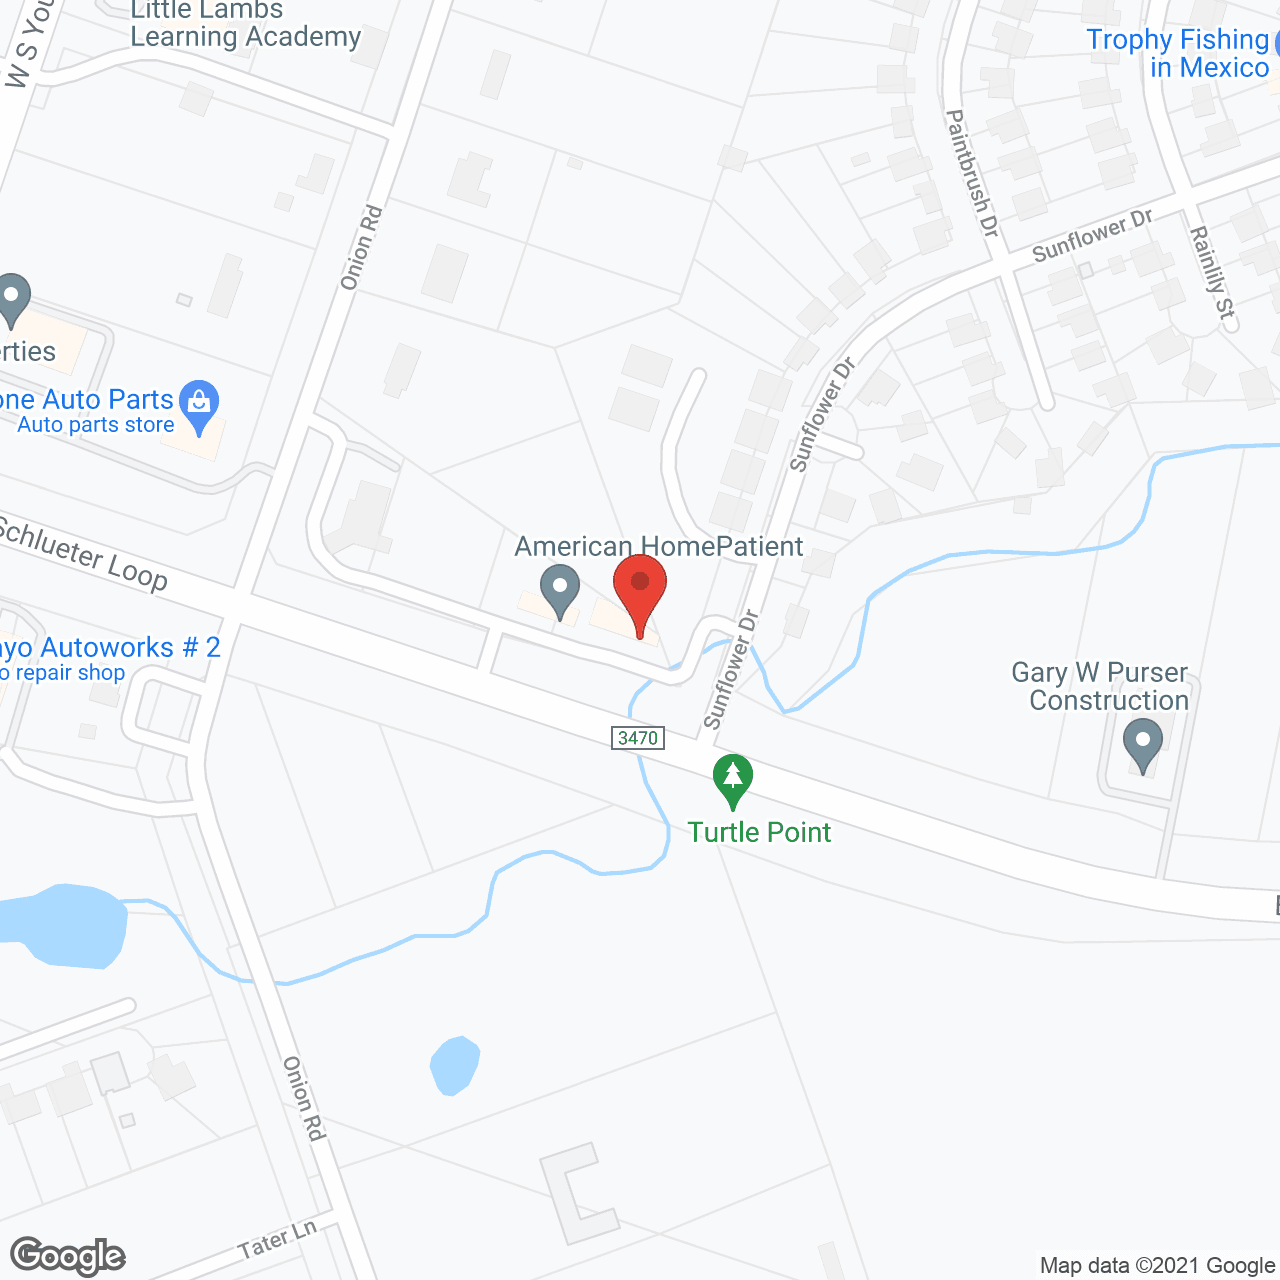 Quality Personal Care Inc in google map